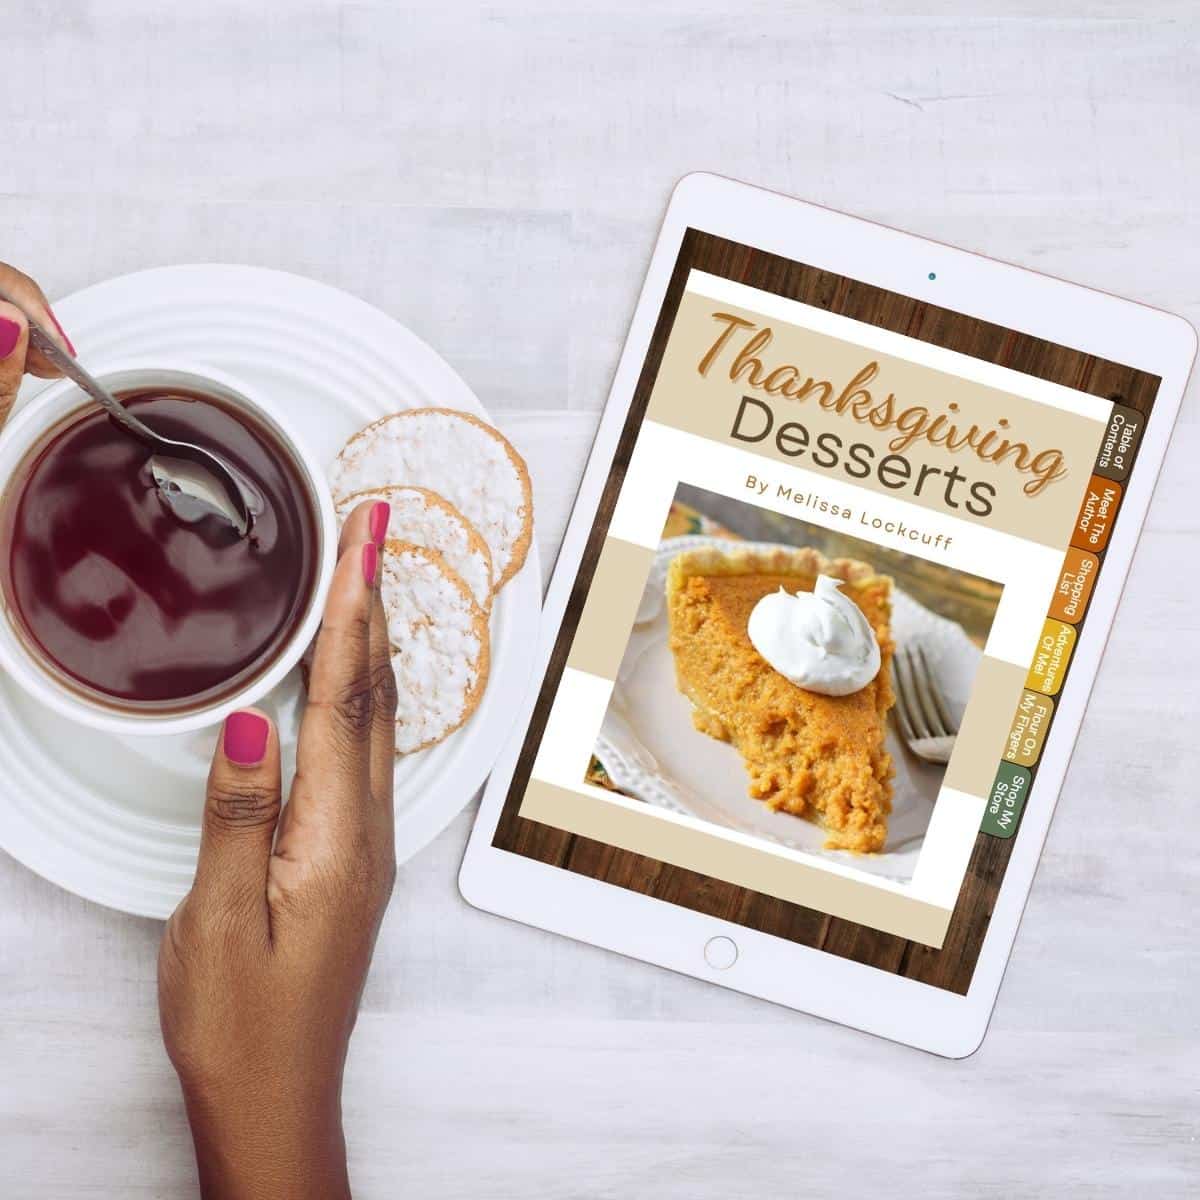 Thanksgiving Desserts eCookbook on tablet with cup of coffee and cookies